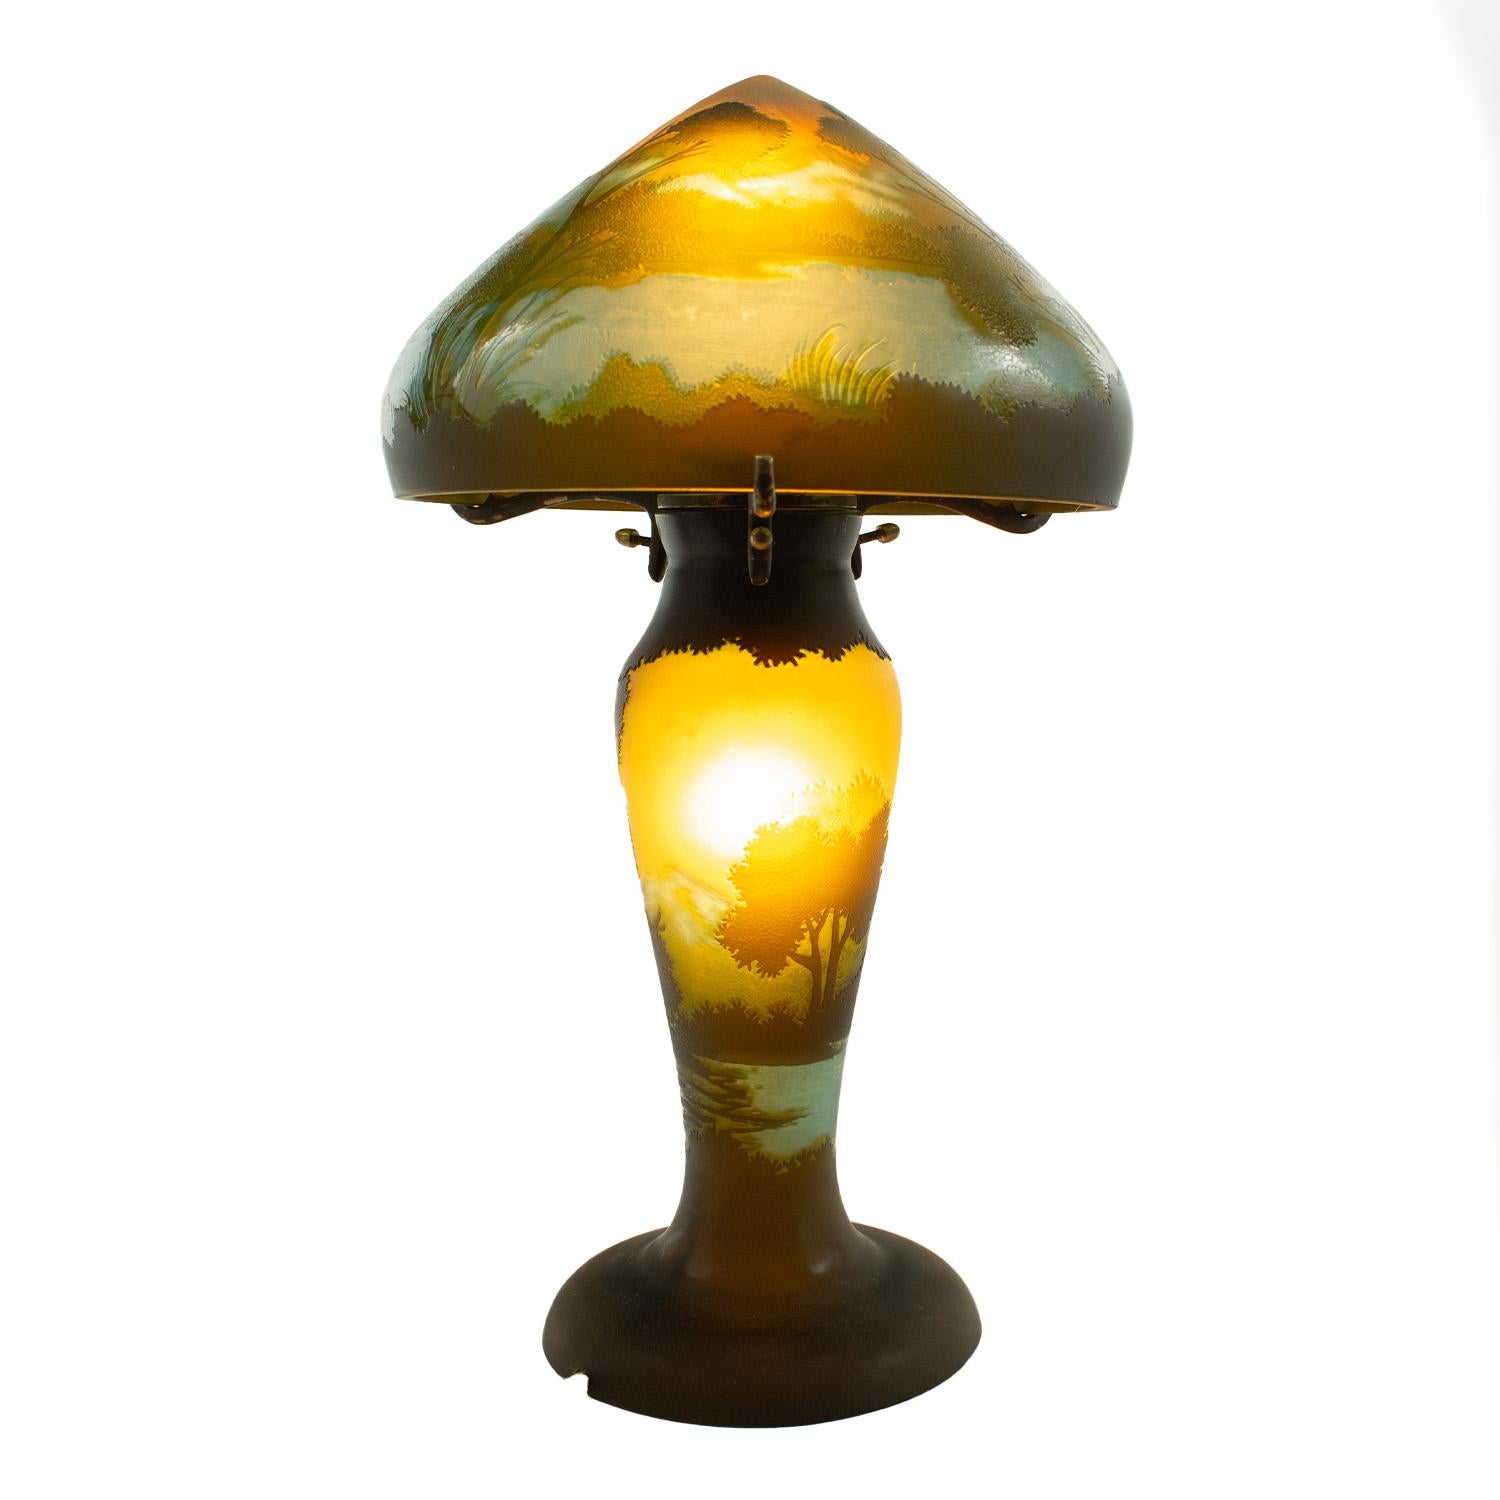 Establishment Gallé, Art Nouveau Mushroom lamp in multilayer glass with acid-etched landscape decoration in blues, greens and yellow. Signed Gallé.
Dimensions: h. 36cm

The lamp is in working order with original wiring which has been left in